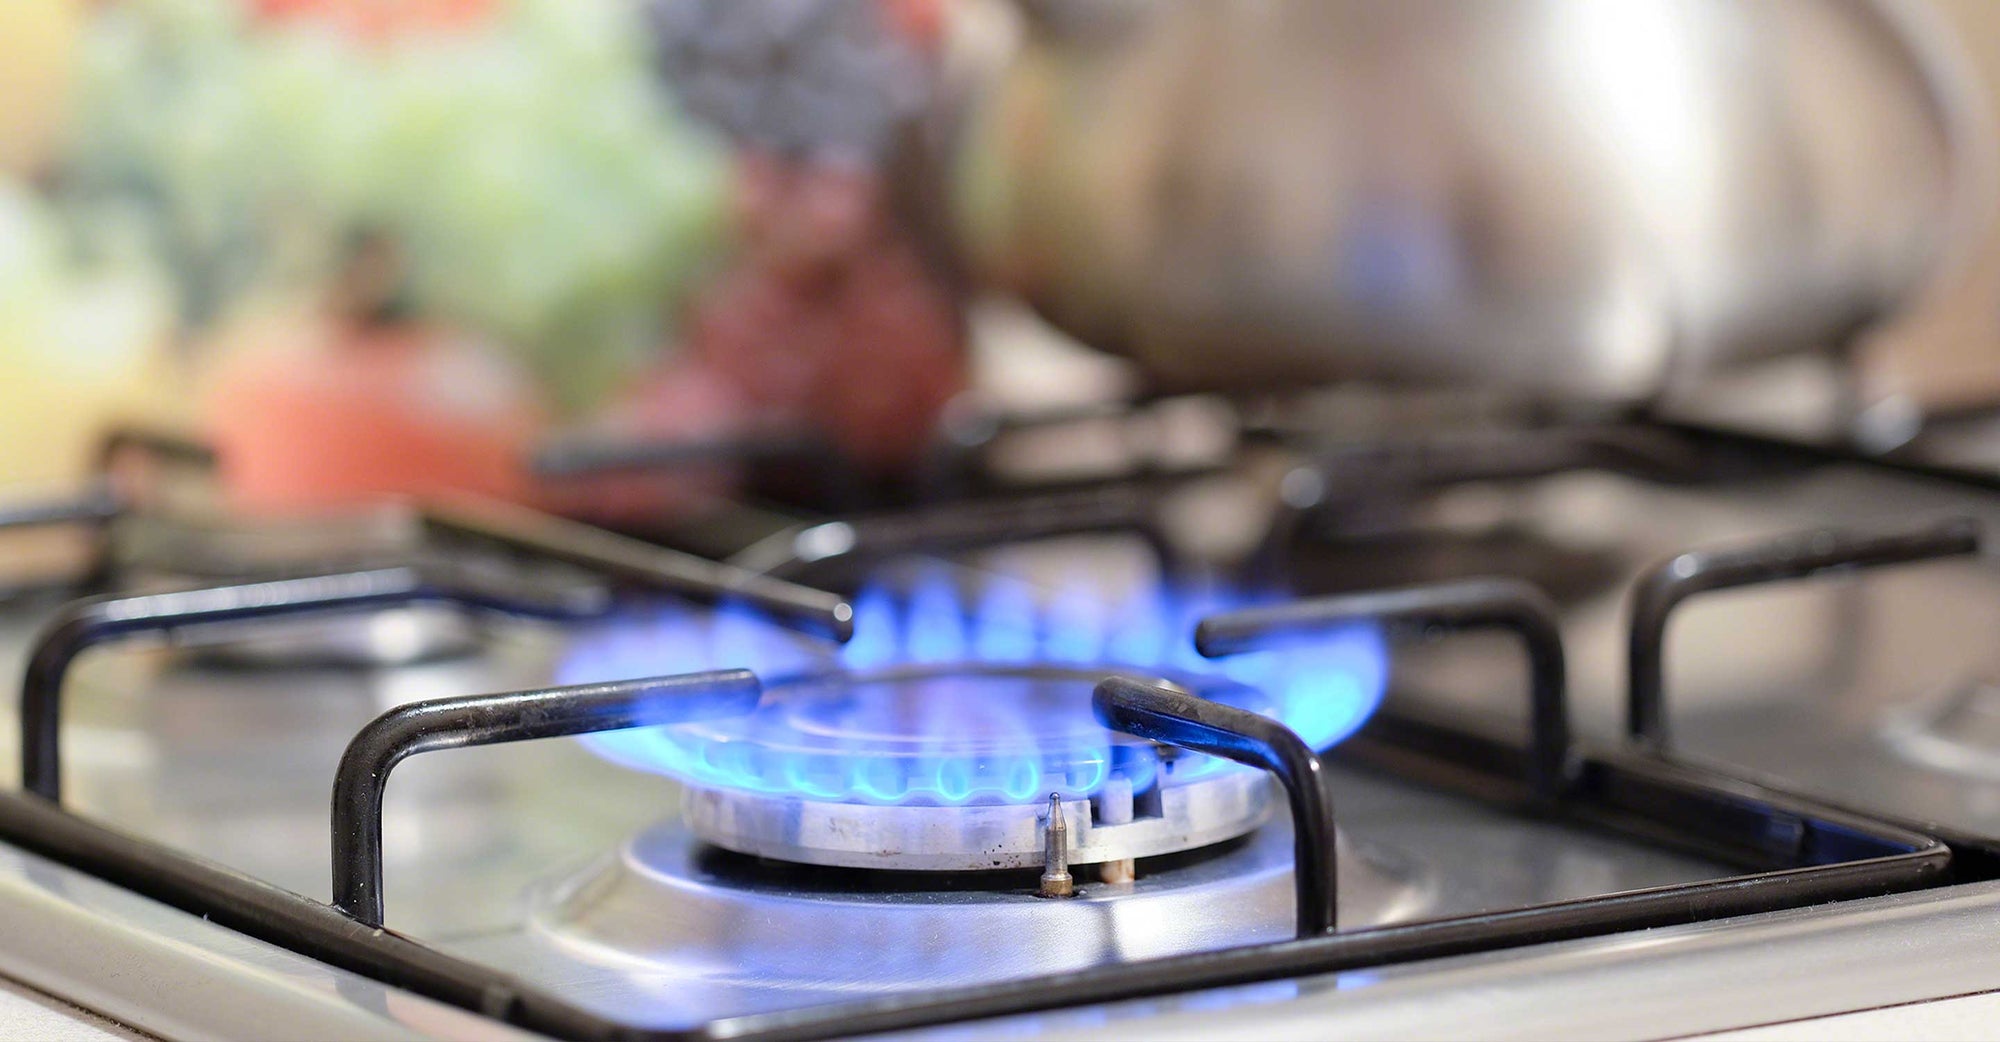 fire over gas stove